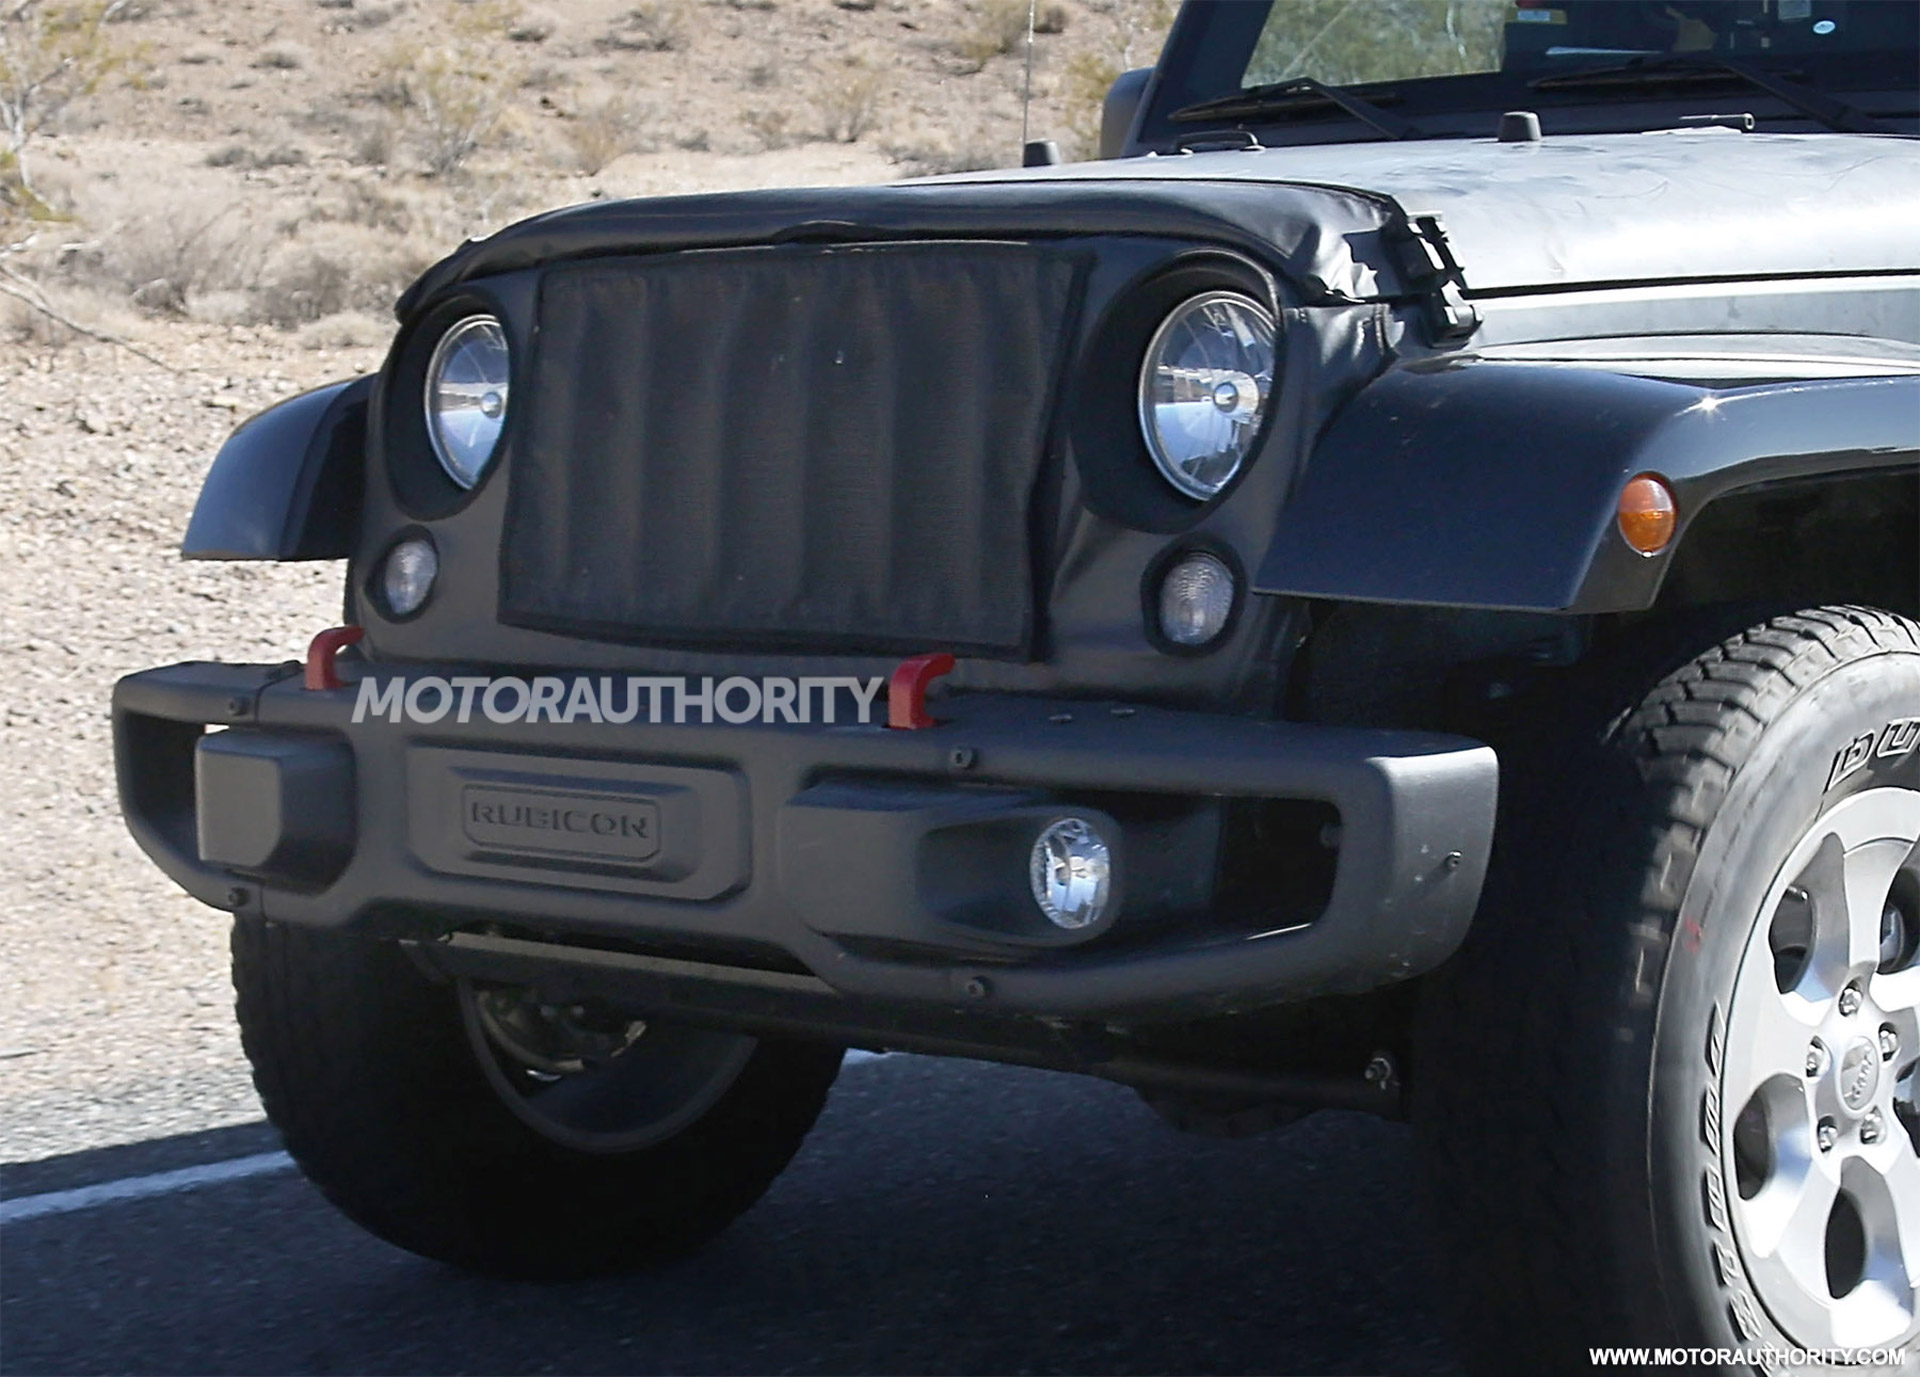 2018 Jeep Wrangler spied with 4-cylinder engine